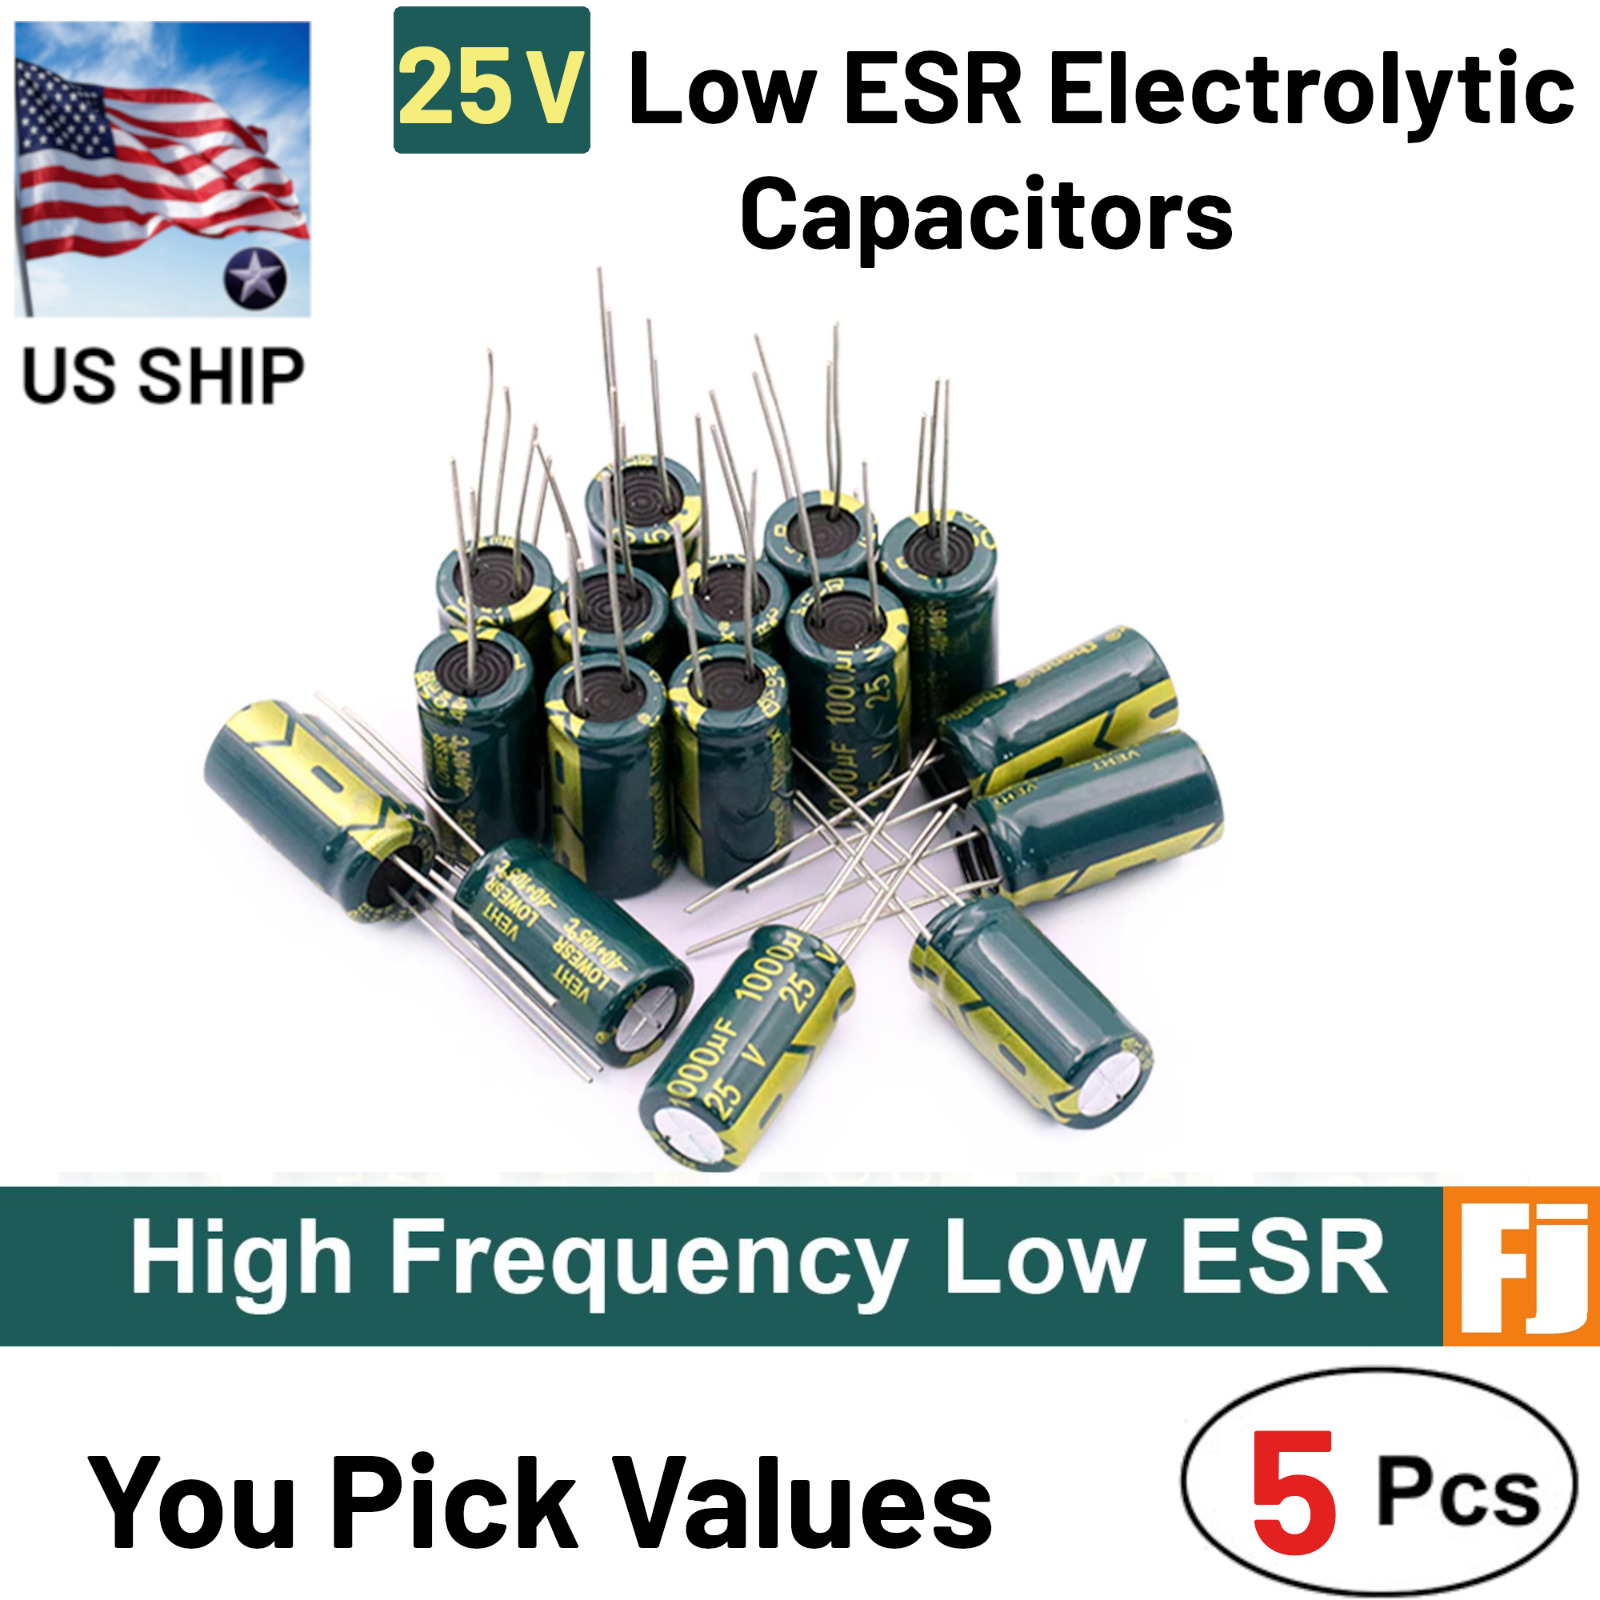 5 Pcs 25V Low ESR High Frequency Electrolytic Capacitors | You Pick | US Ship